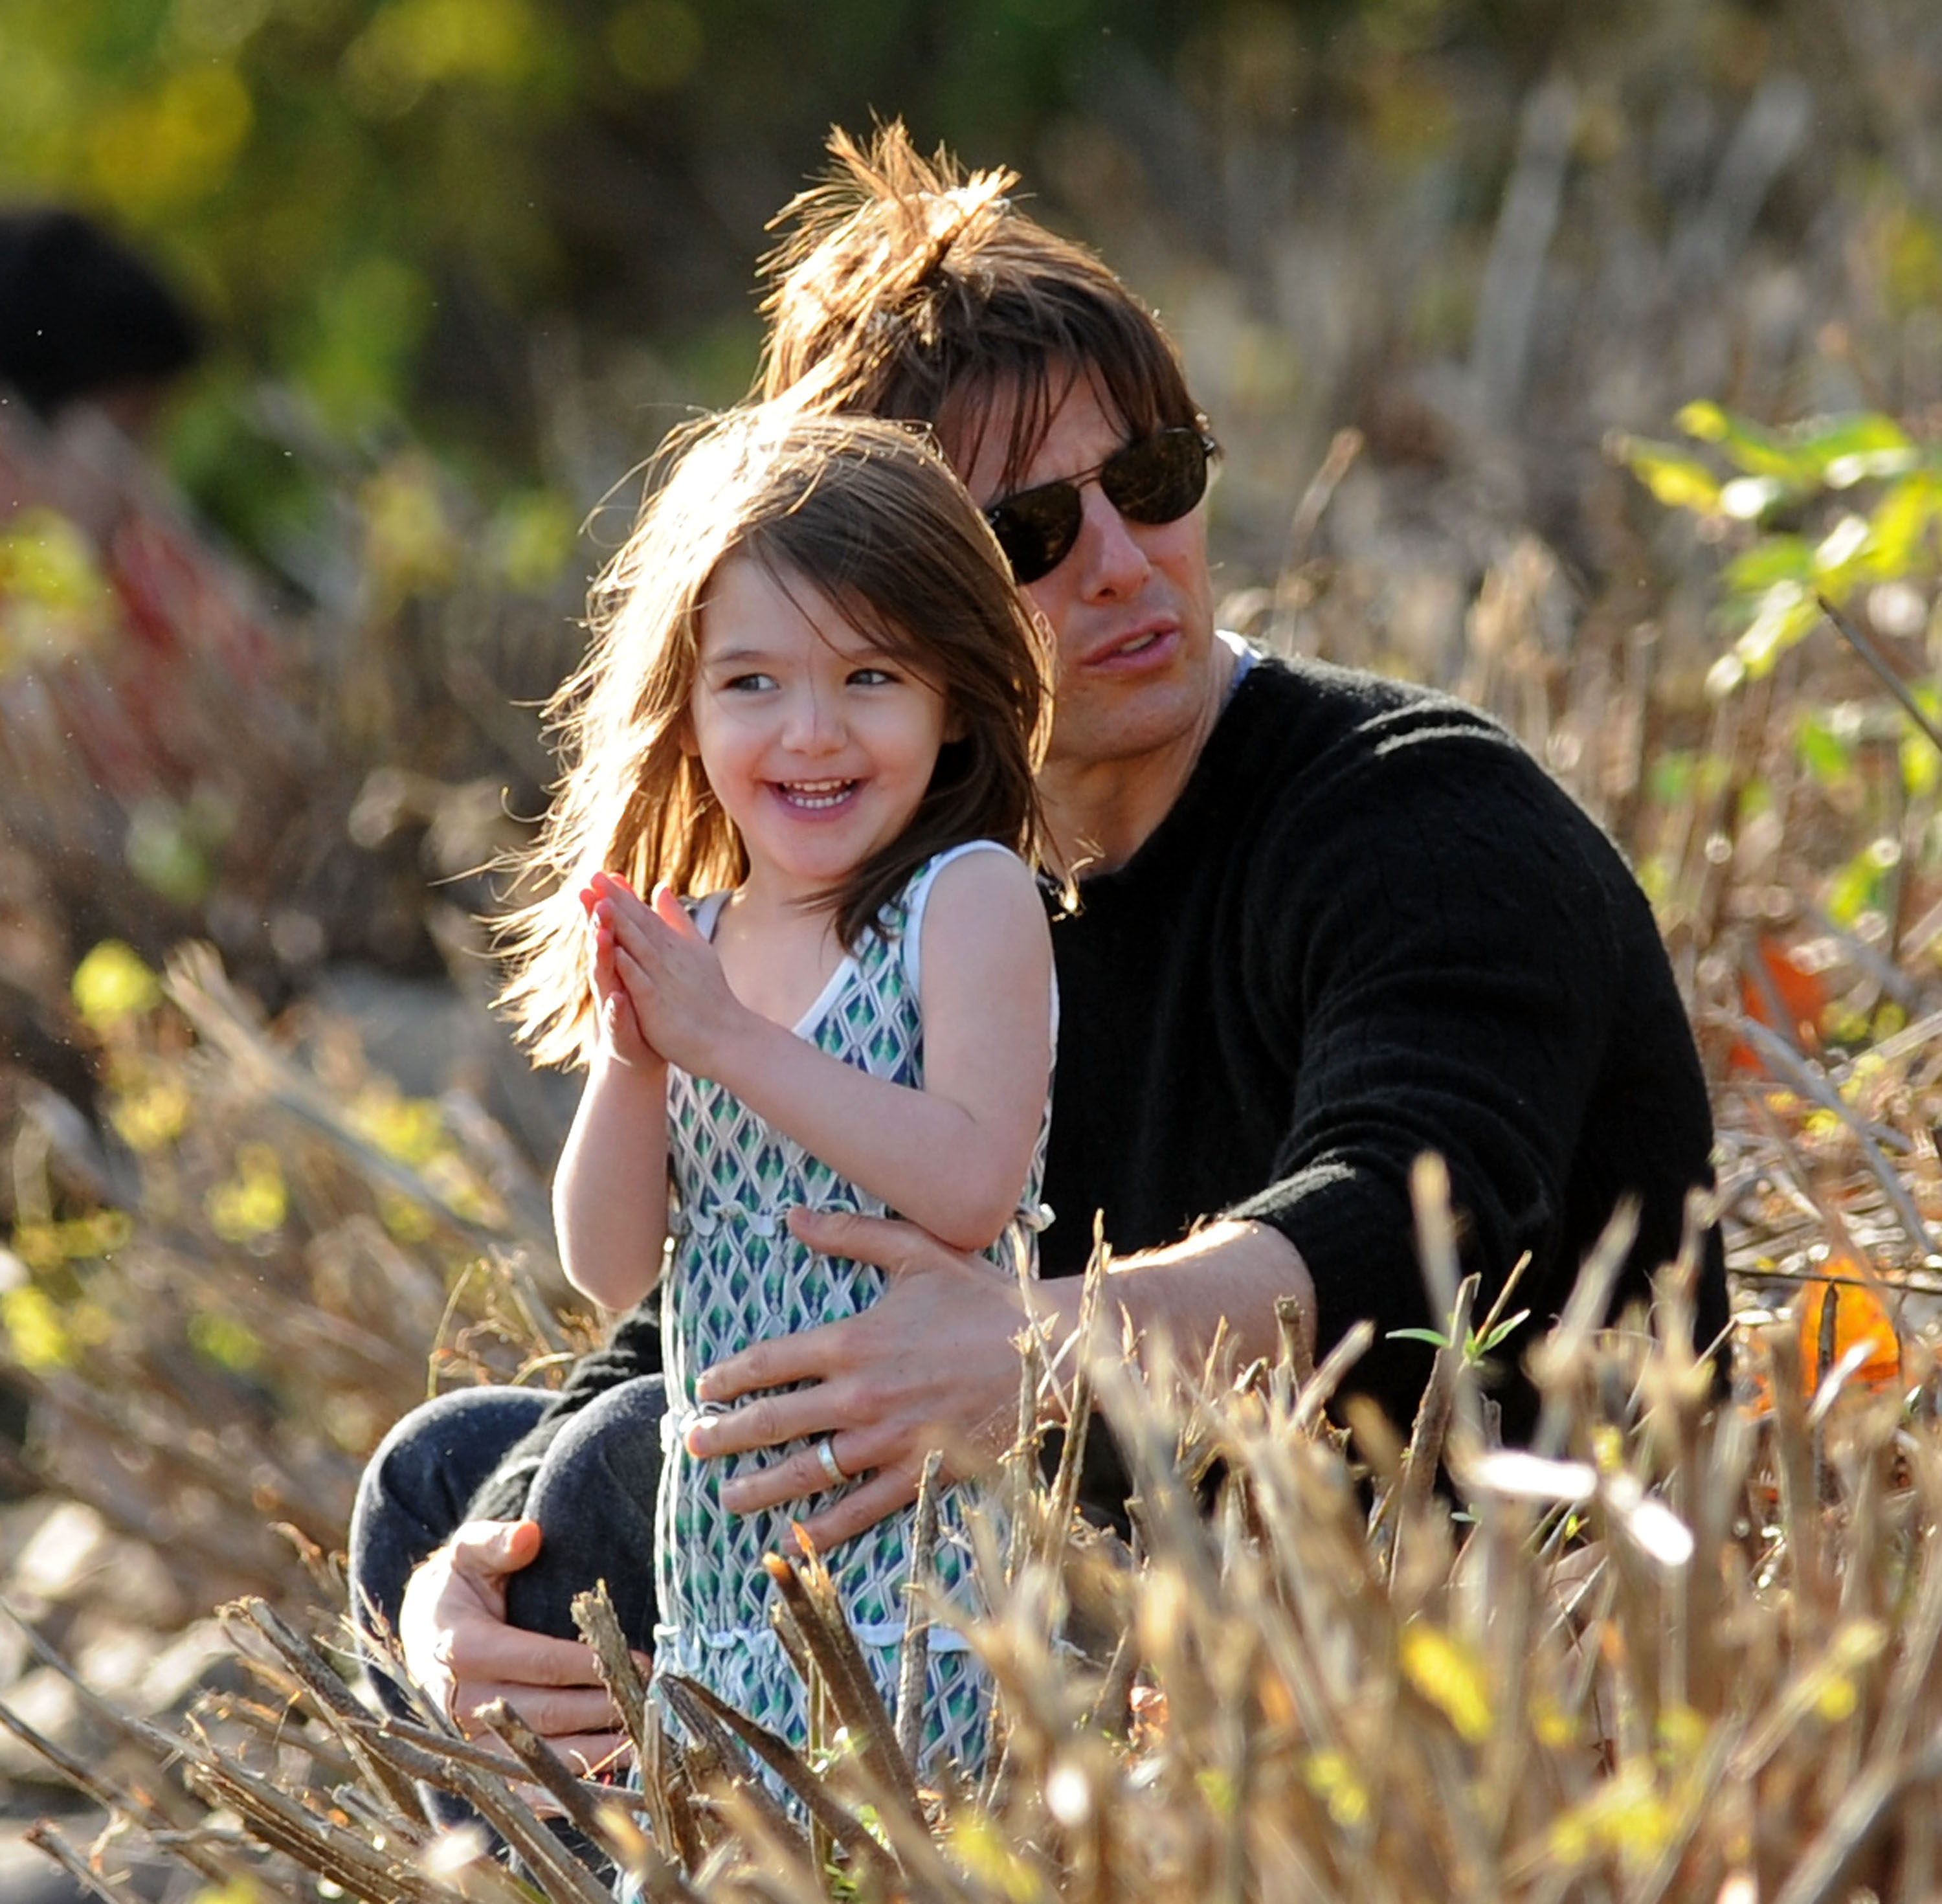 Suri Cruise and Tom Cruise visit Charles River Basin in Cambridge, Massachusetts, on October 10, 2009. | Source: Getty Images